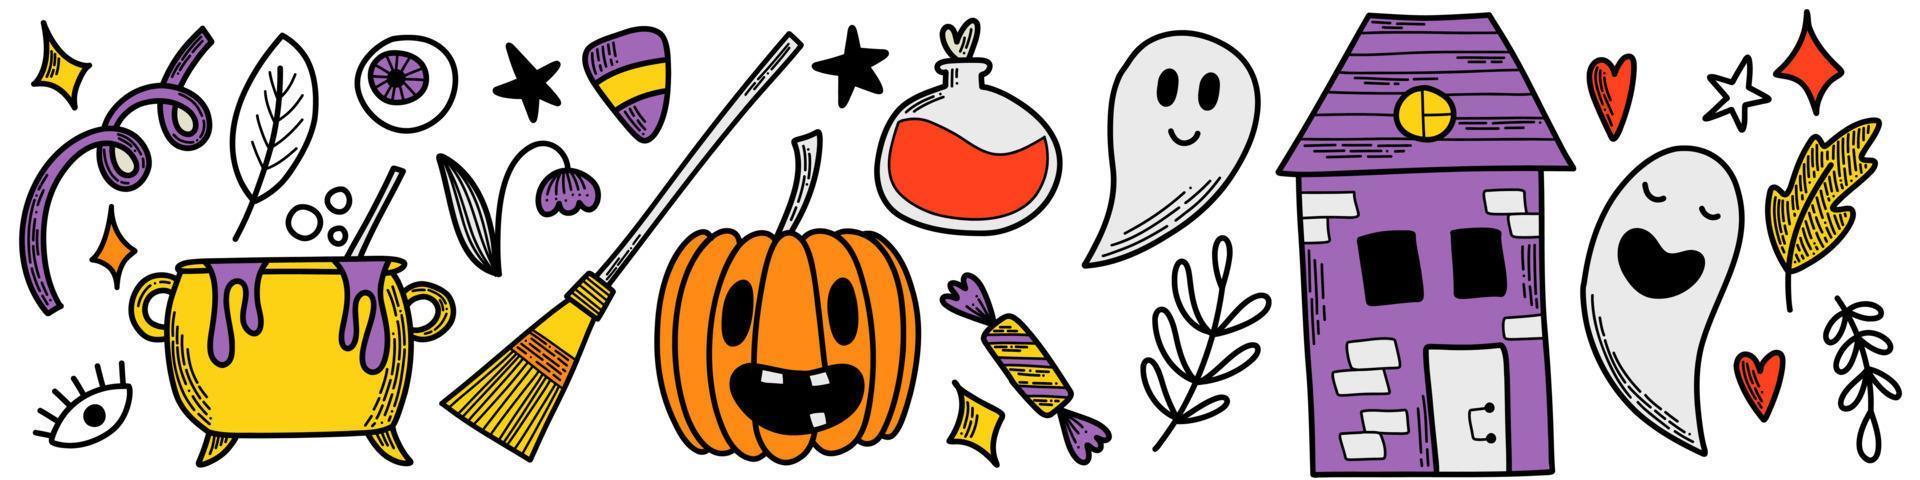 Halloween vector set of elements. Line art flat design. Pack of outline symbol. Design icons for promotion banners and cards. Pumpkin, jack o lantern, candy, poison, candle, spell, bone, magic.